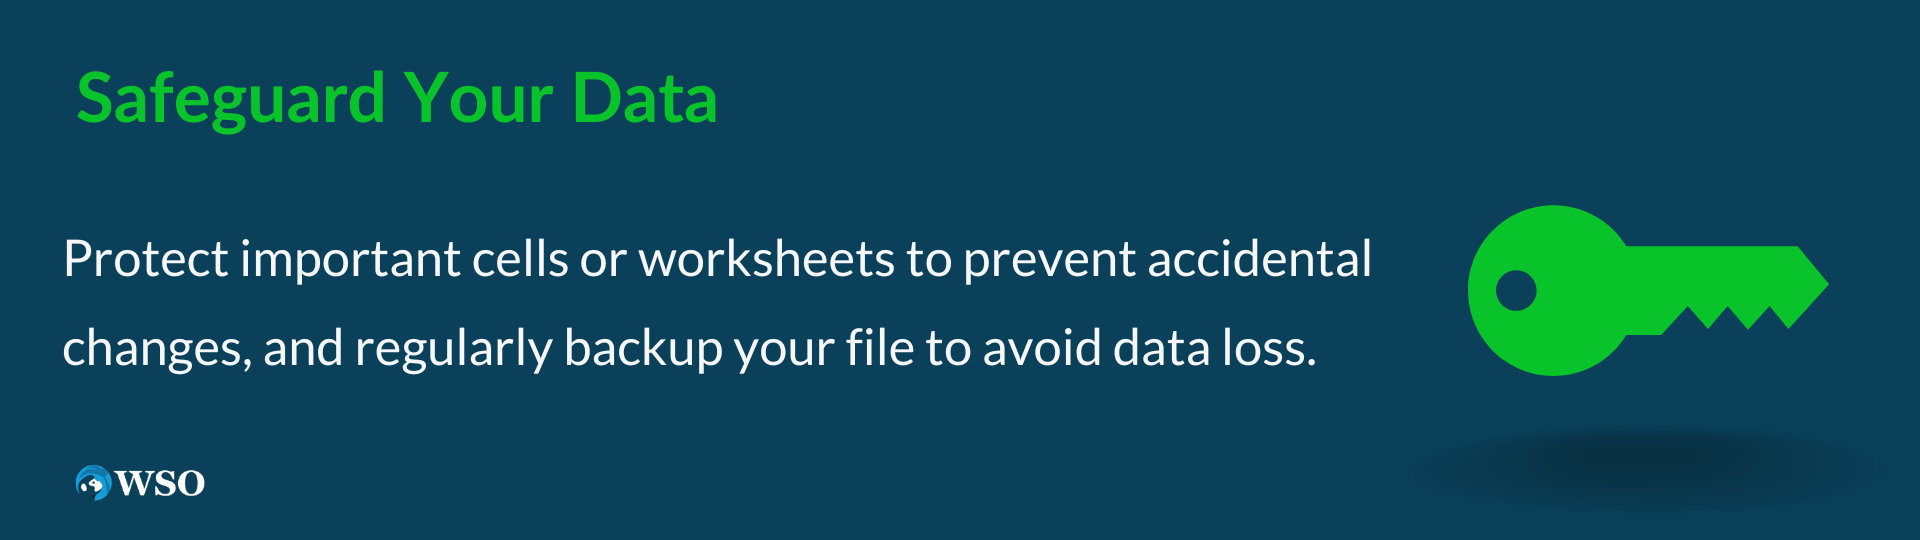 Safeguard Your Data in excel